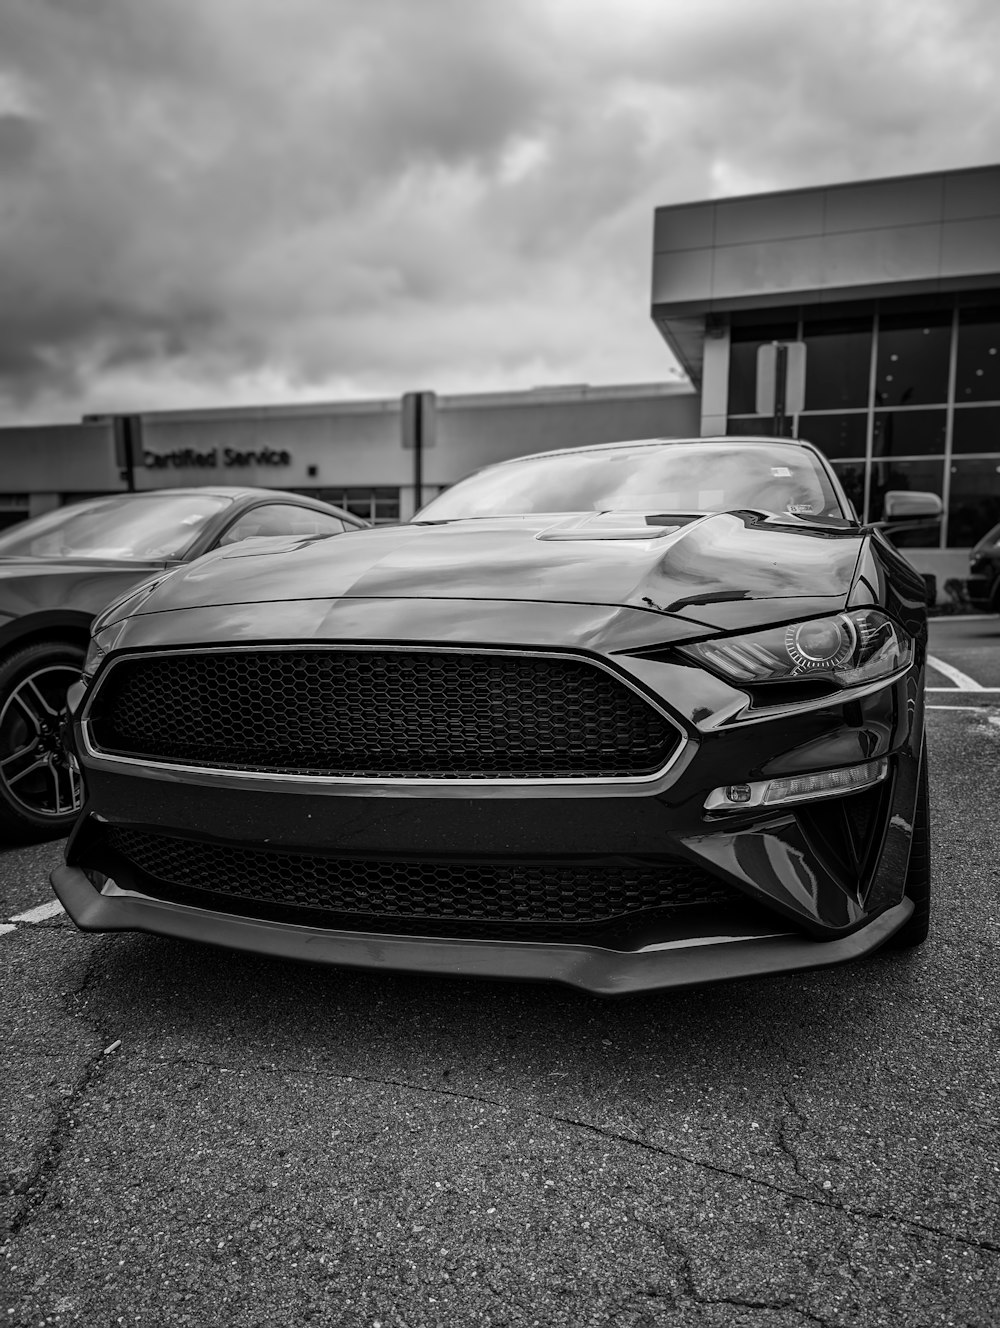 a black and white photo of a car in a parking lot